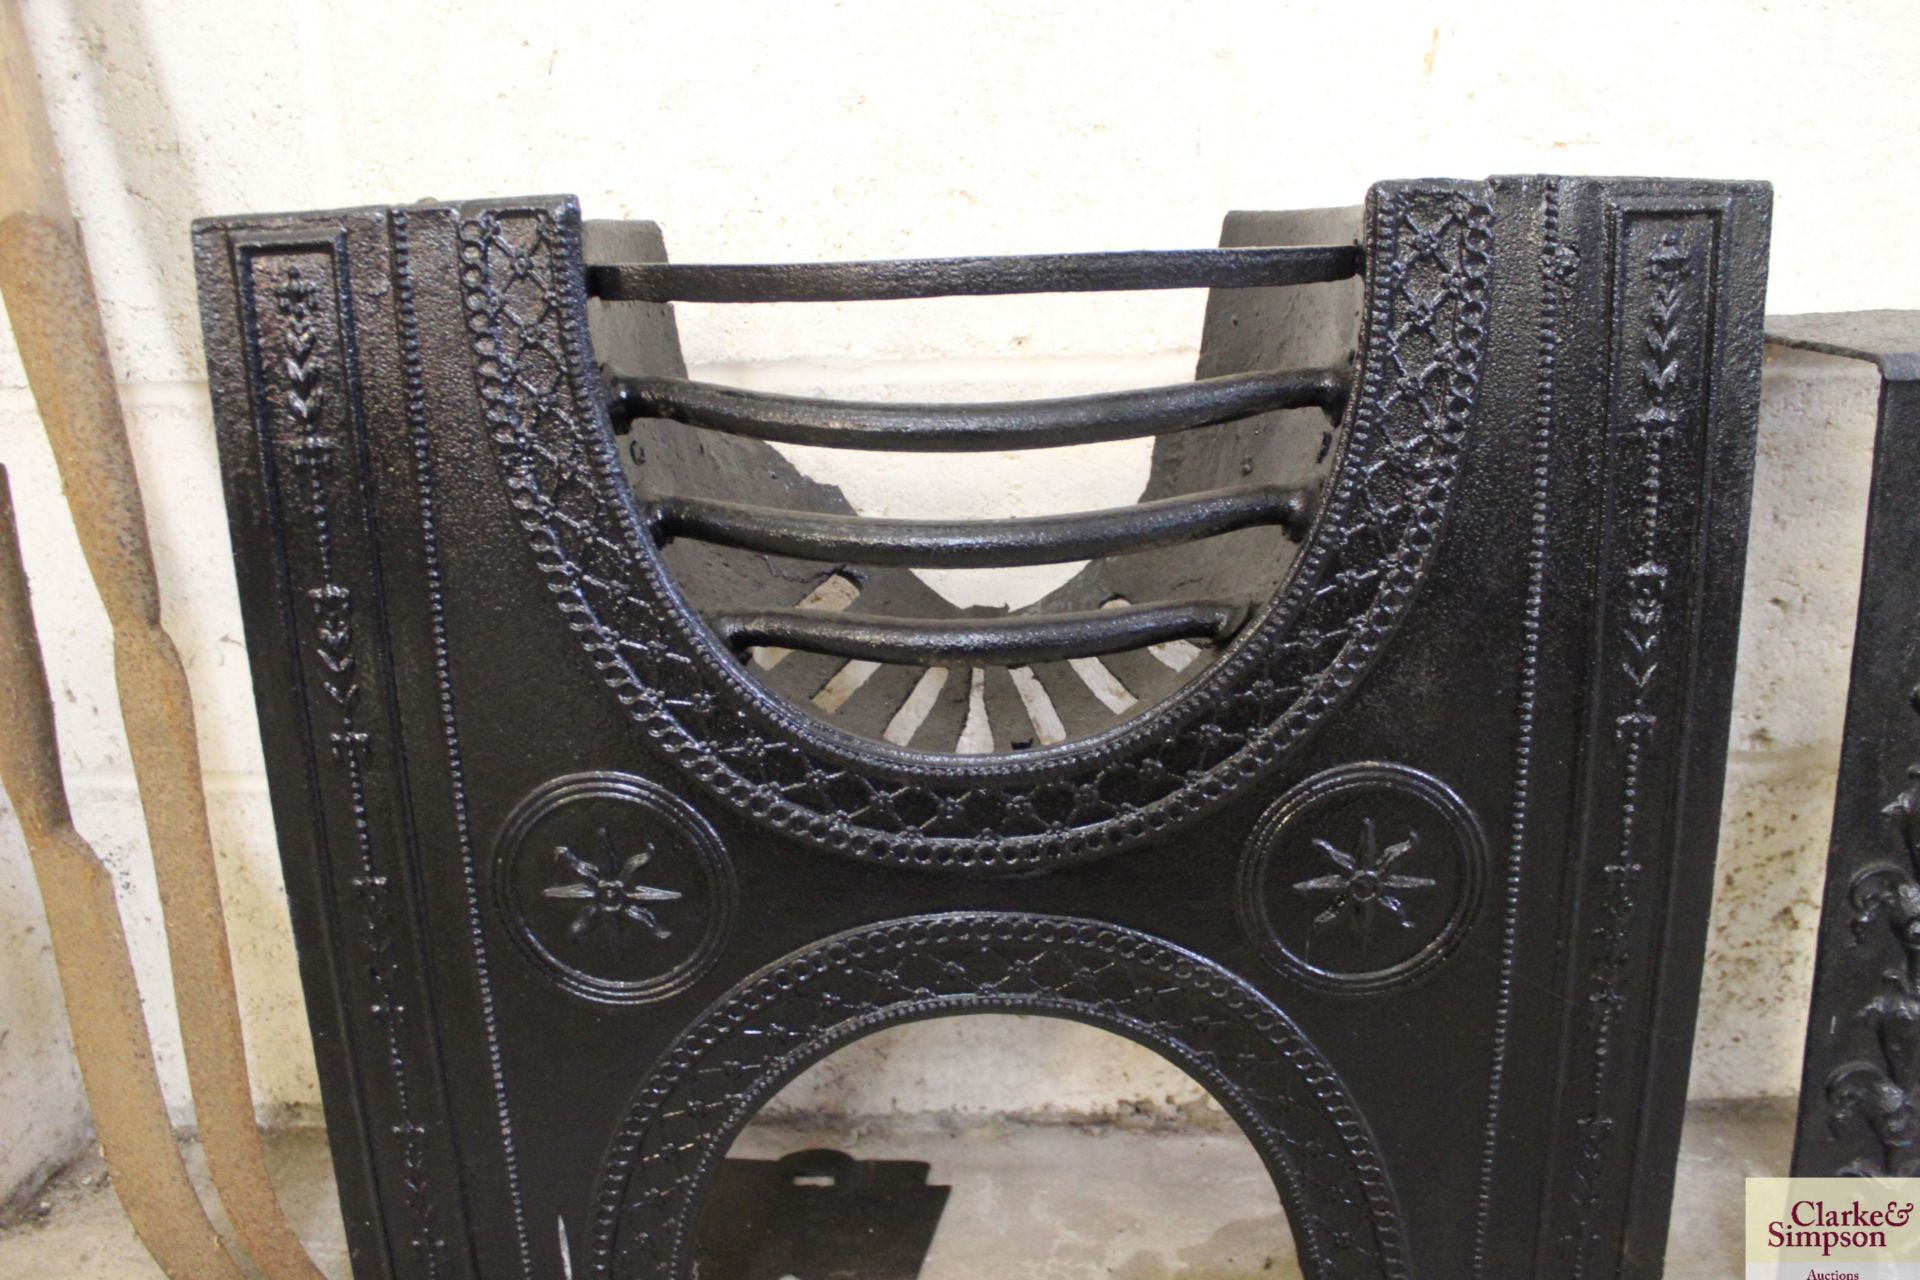 An ornate cast iron bedroom grate, approx. 24" wid - Image 3 of 4